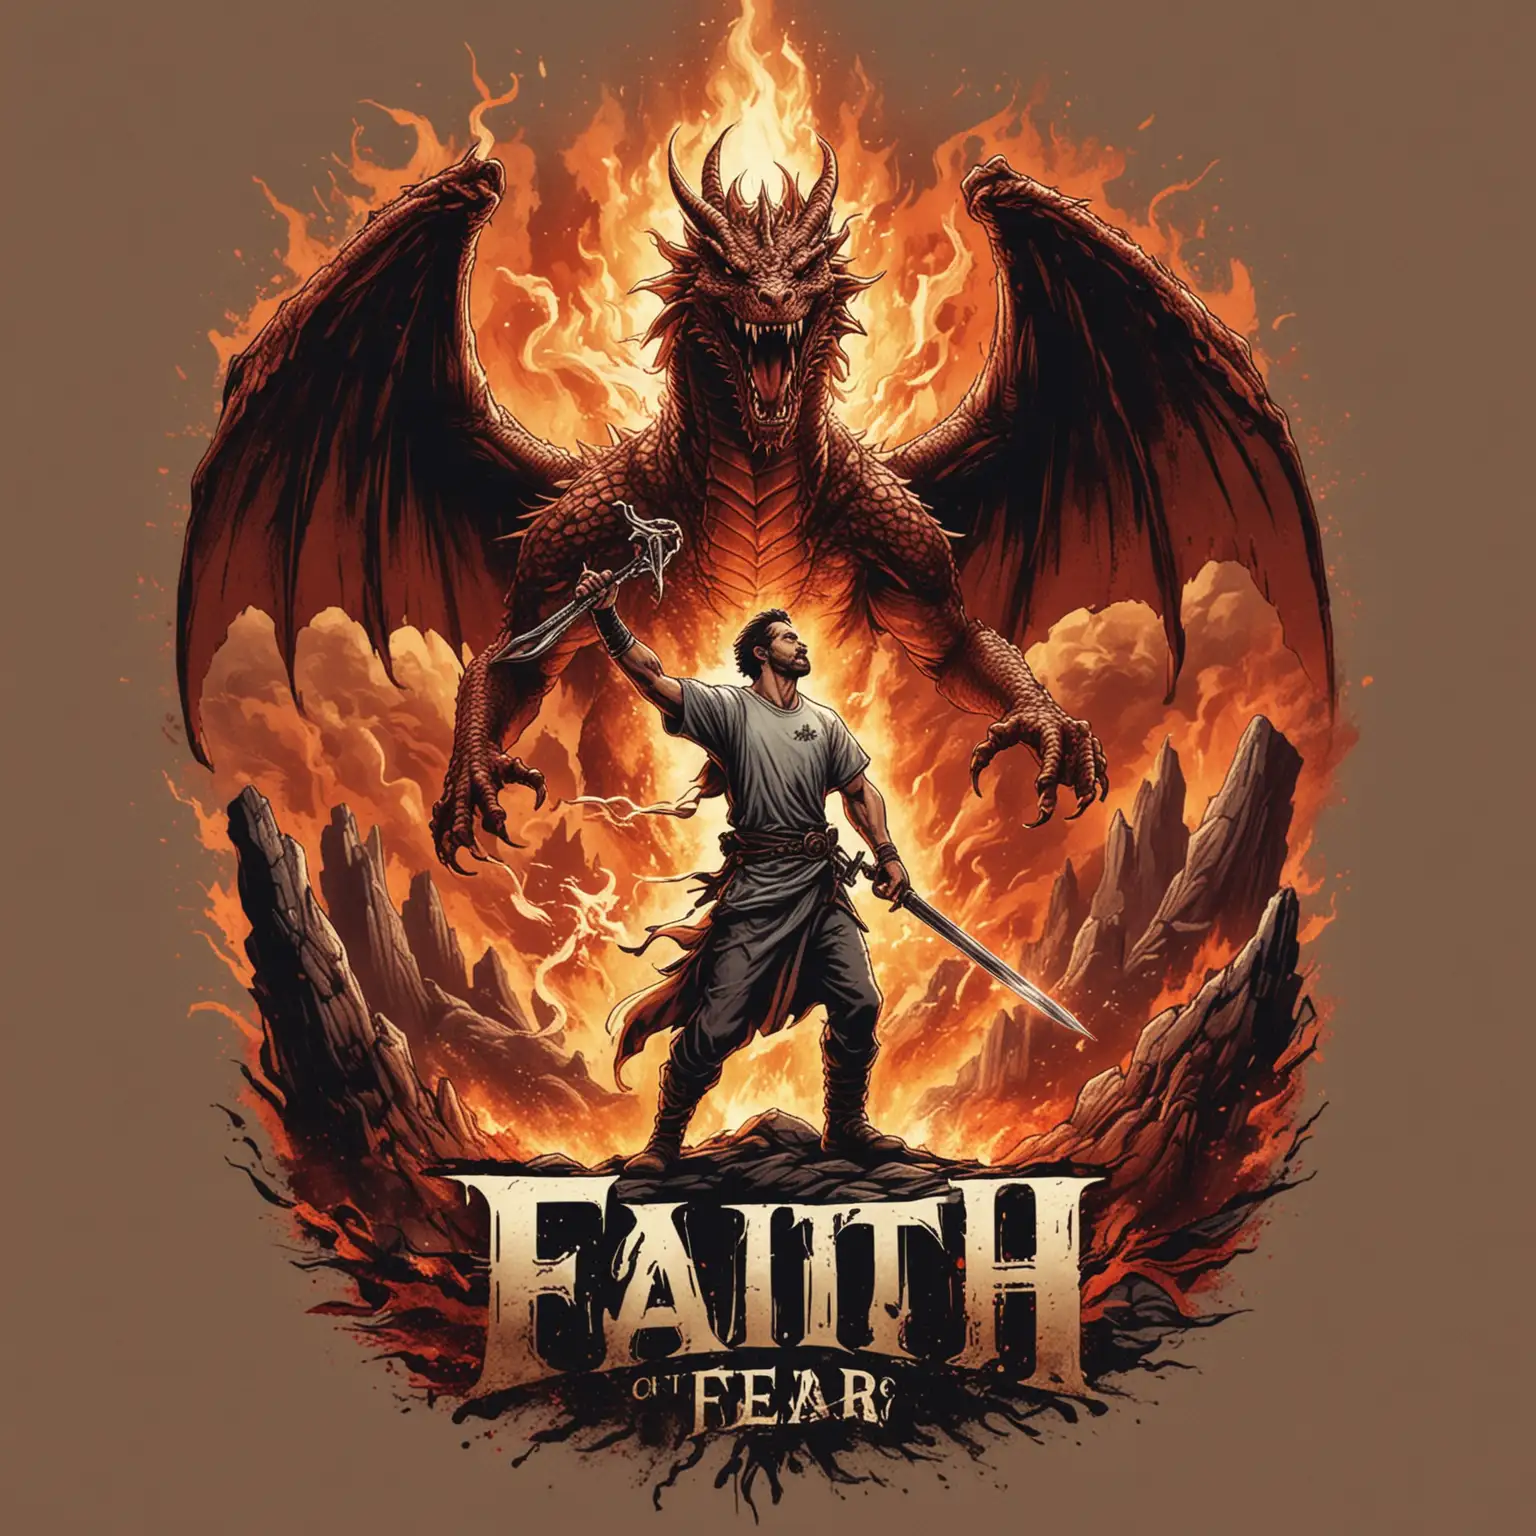 Create a modern vector art christian t shirt design the says Faith Over Fear. Include a man holding sword  fight a fire breathing dragon with an angel in the background.